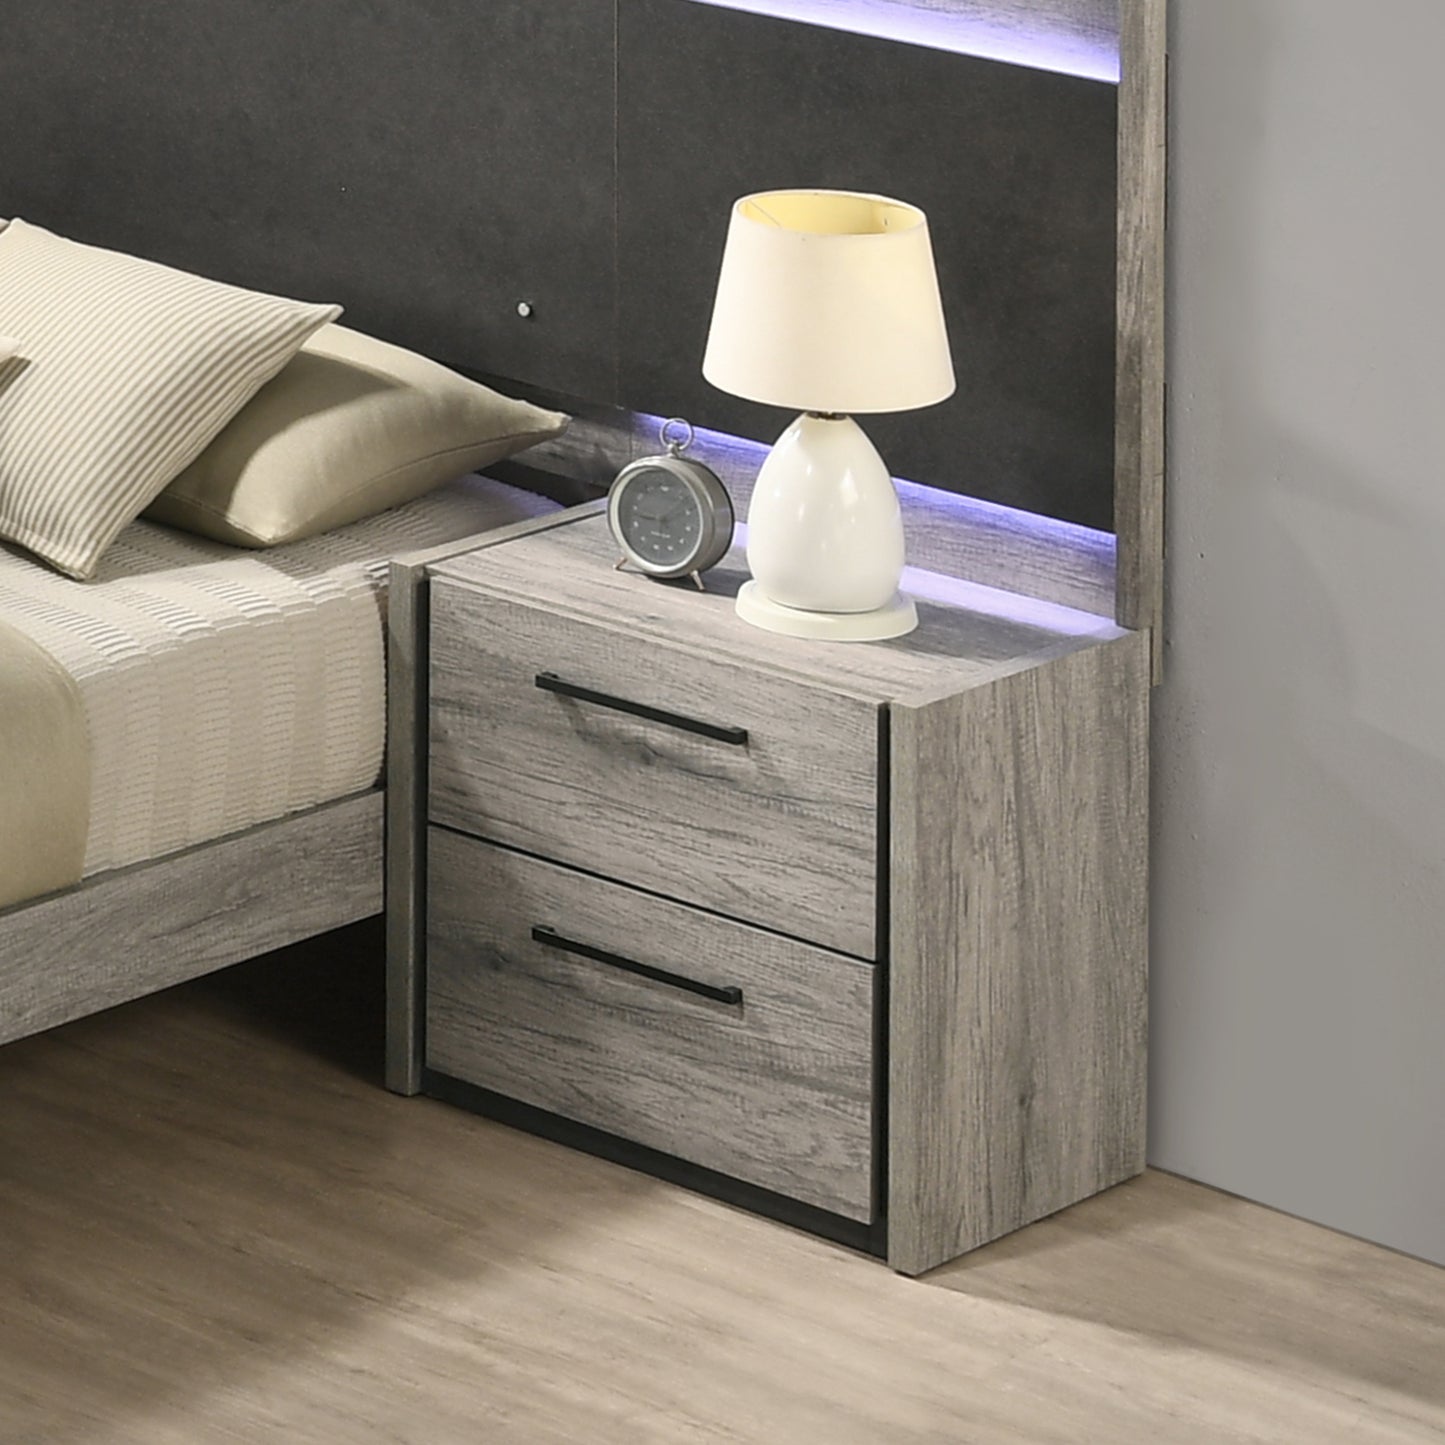 Roundhill Furniture Lenca LED Wallbed with Nightstands - Weathered Gray